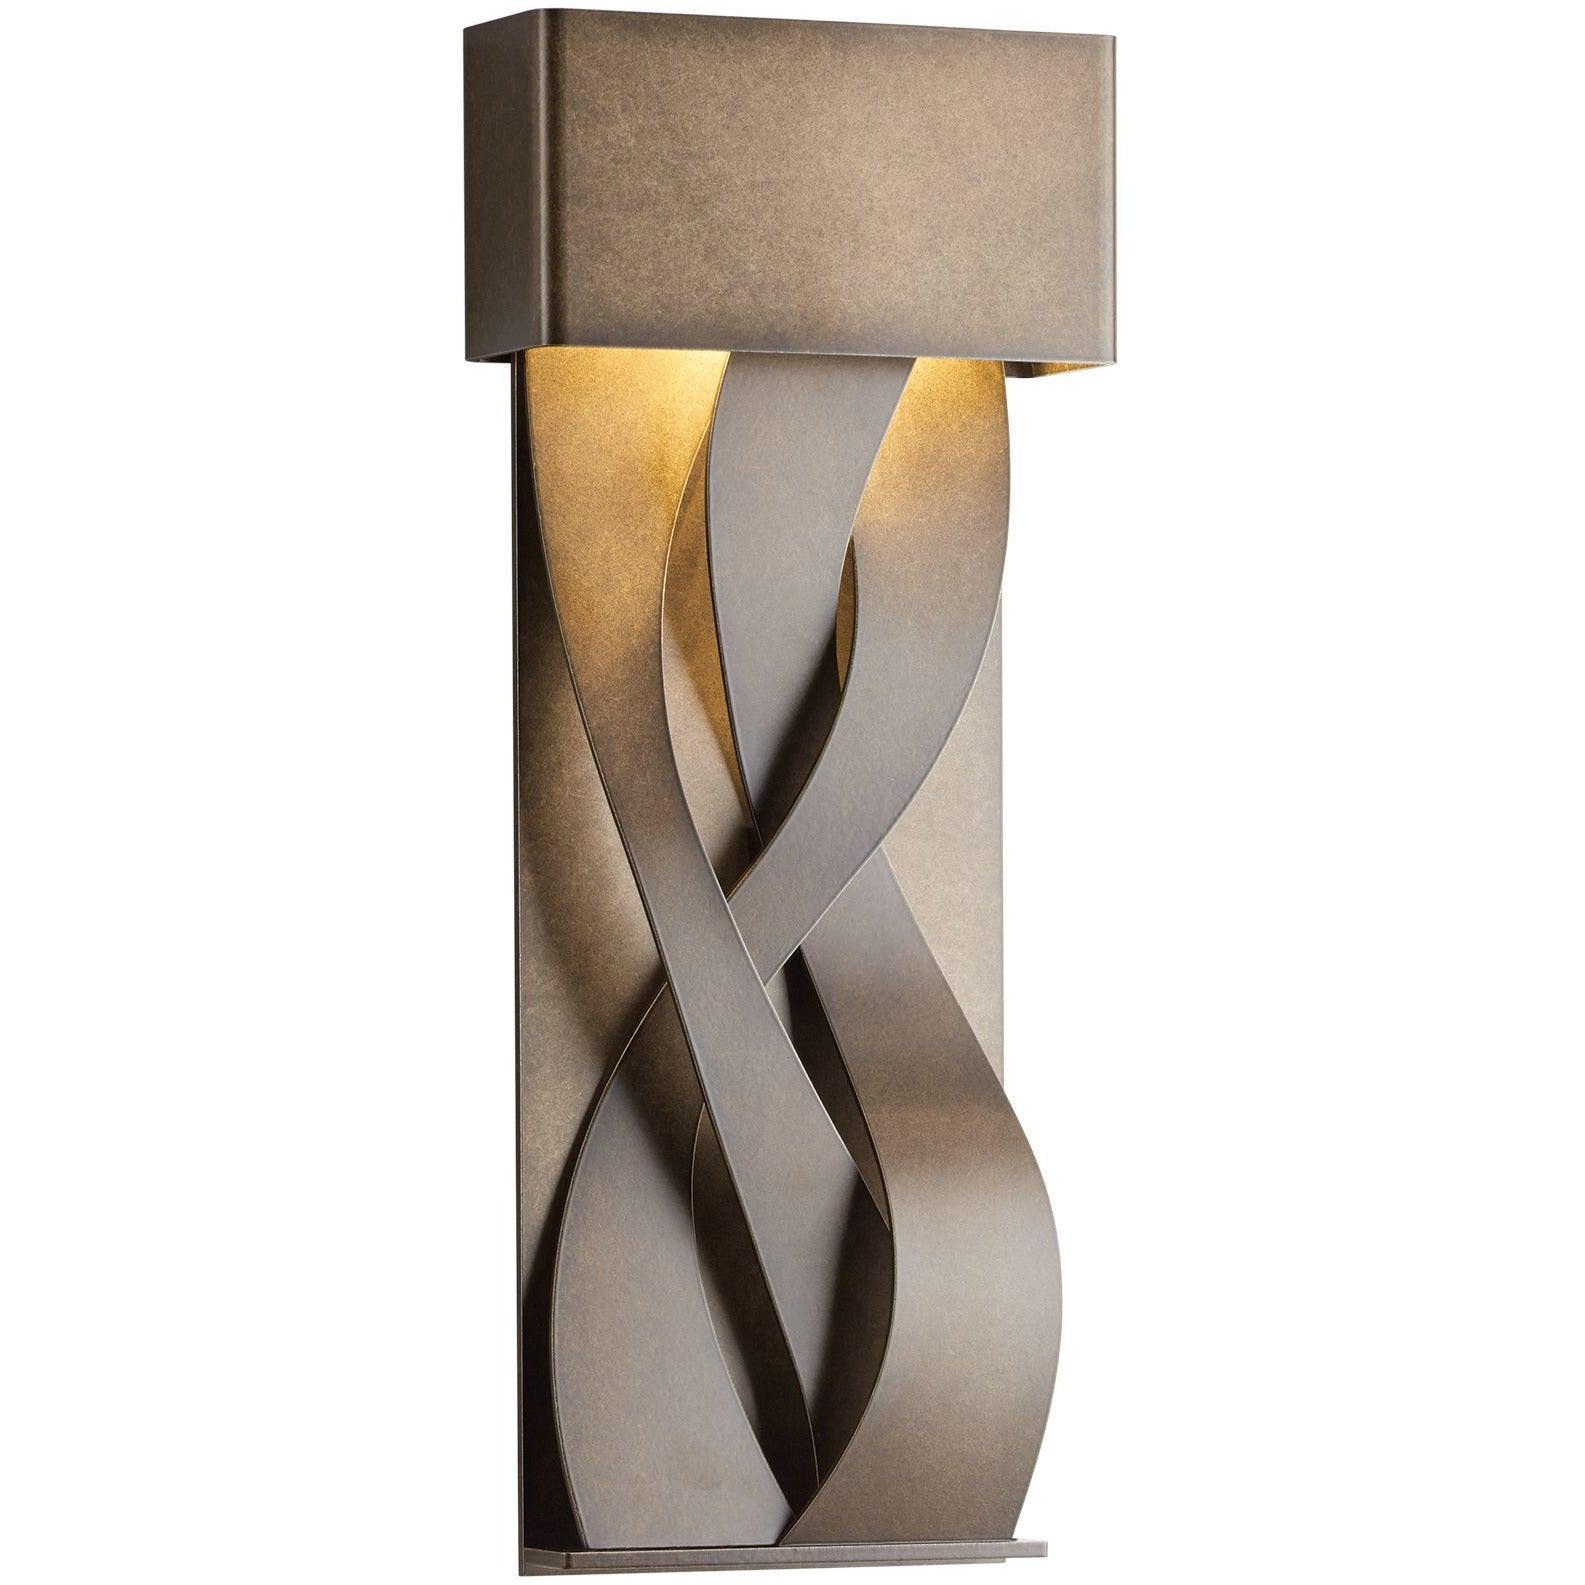 Hubbardton Forge - Tress 22-Inch LED Outdoor Wall Sconce - 302527-LED-73 | Montreal Lighting & Hardware